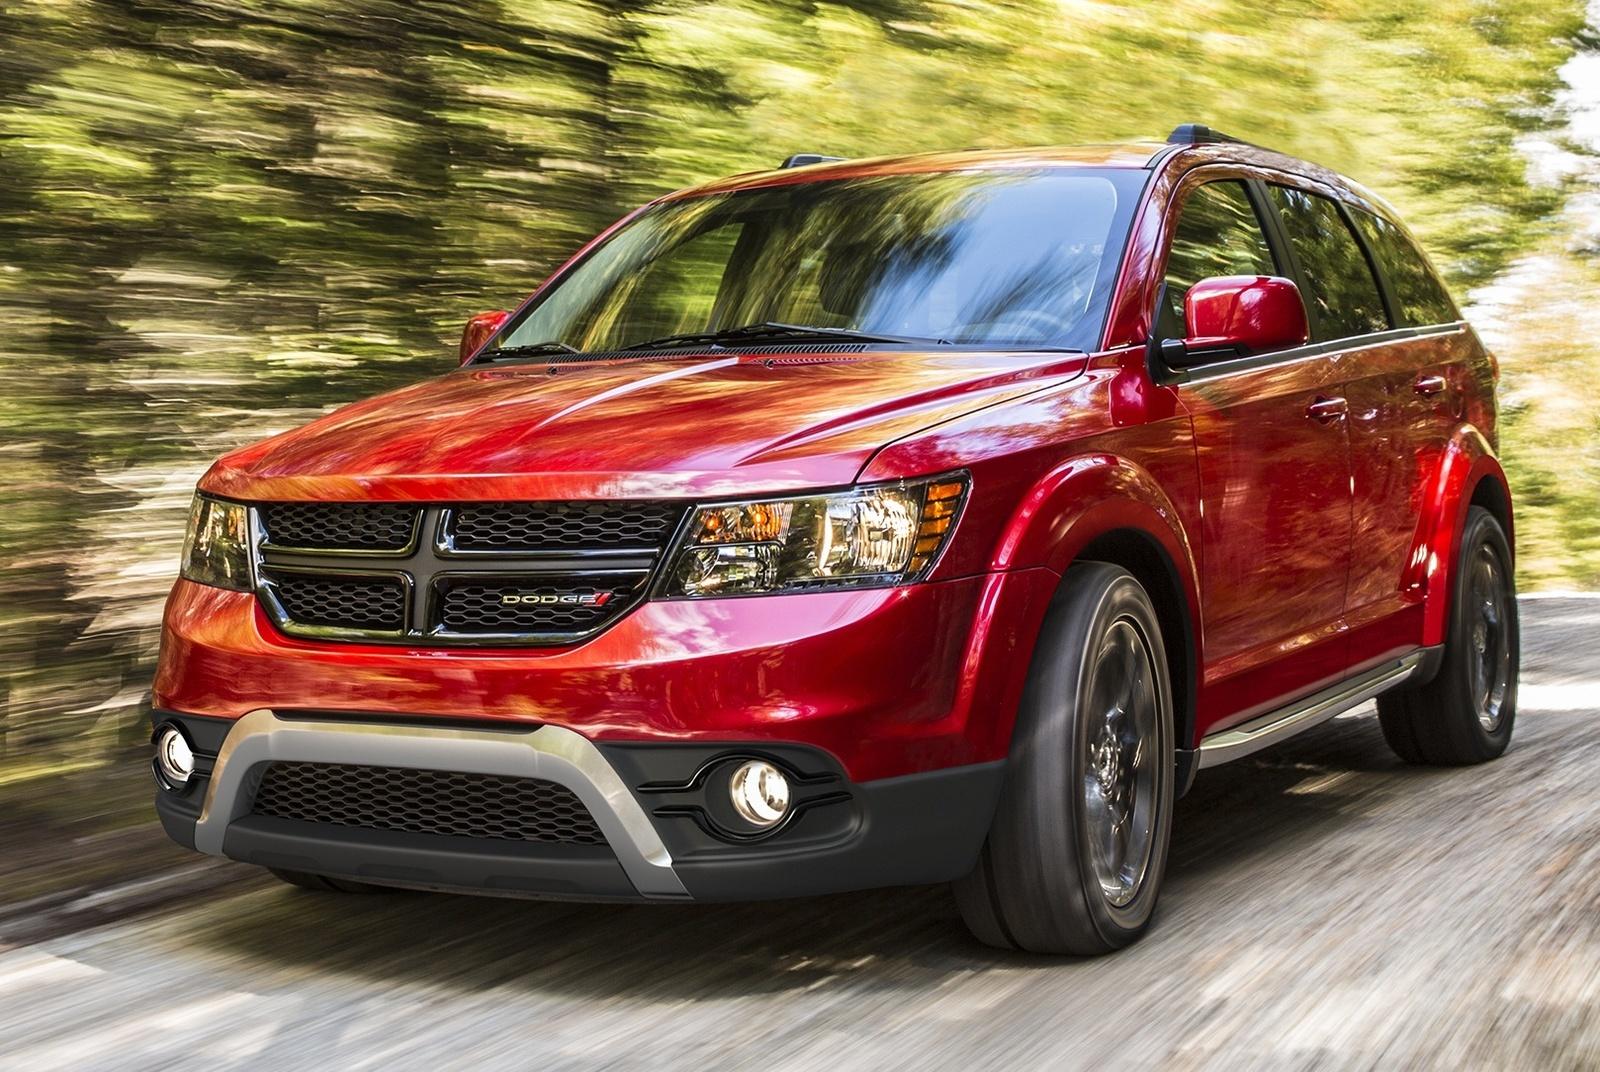 2020 Dodge Journey Redesign, Features, Pictures